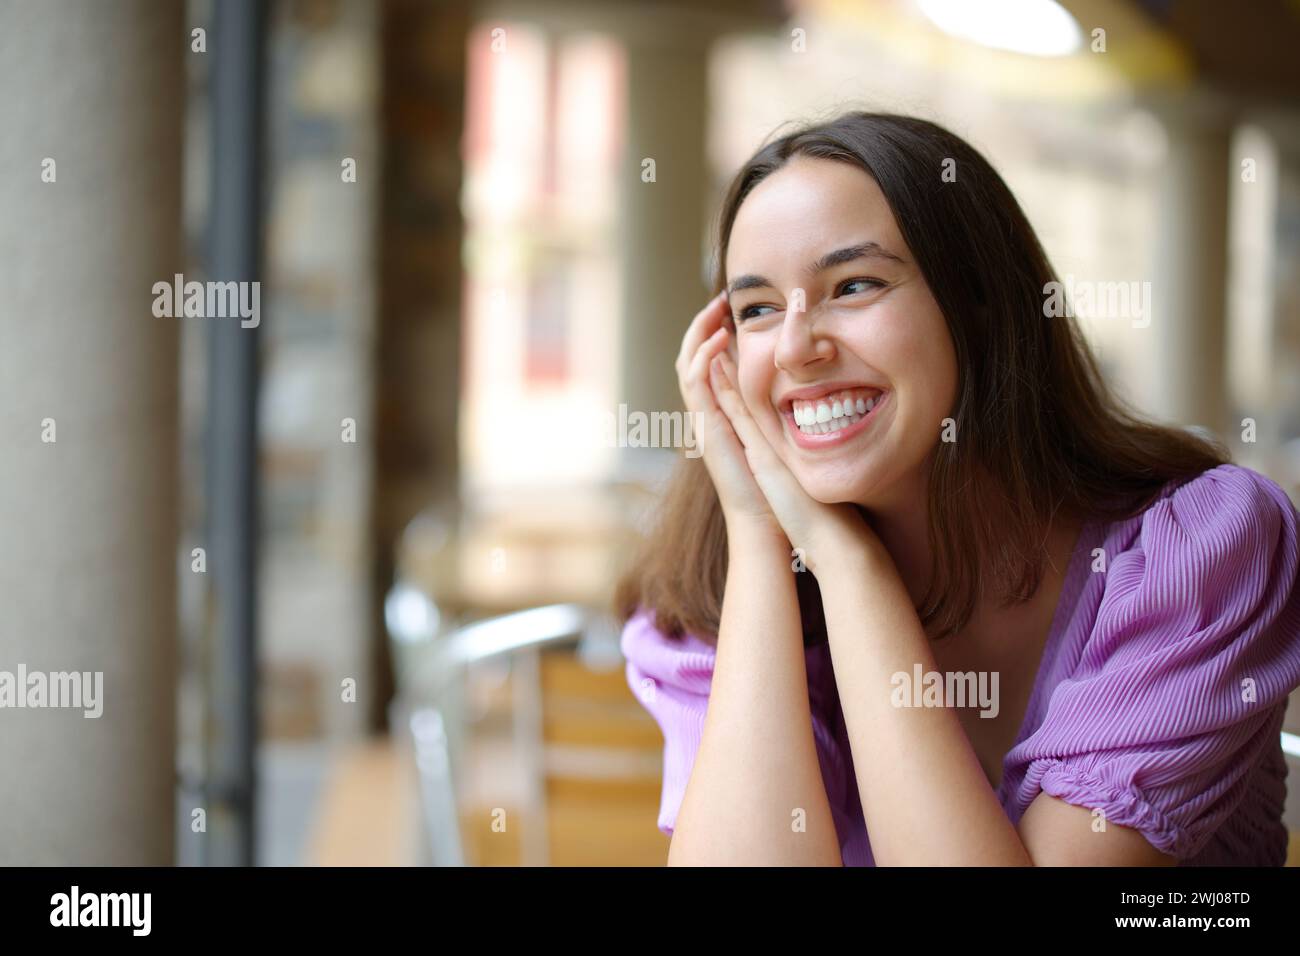 Happy woman laughing alone in a bar looking at side Stock Photo